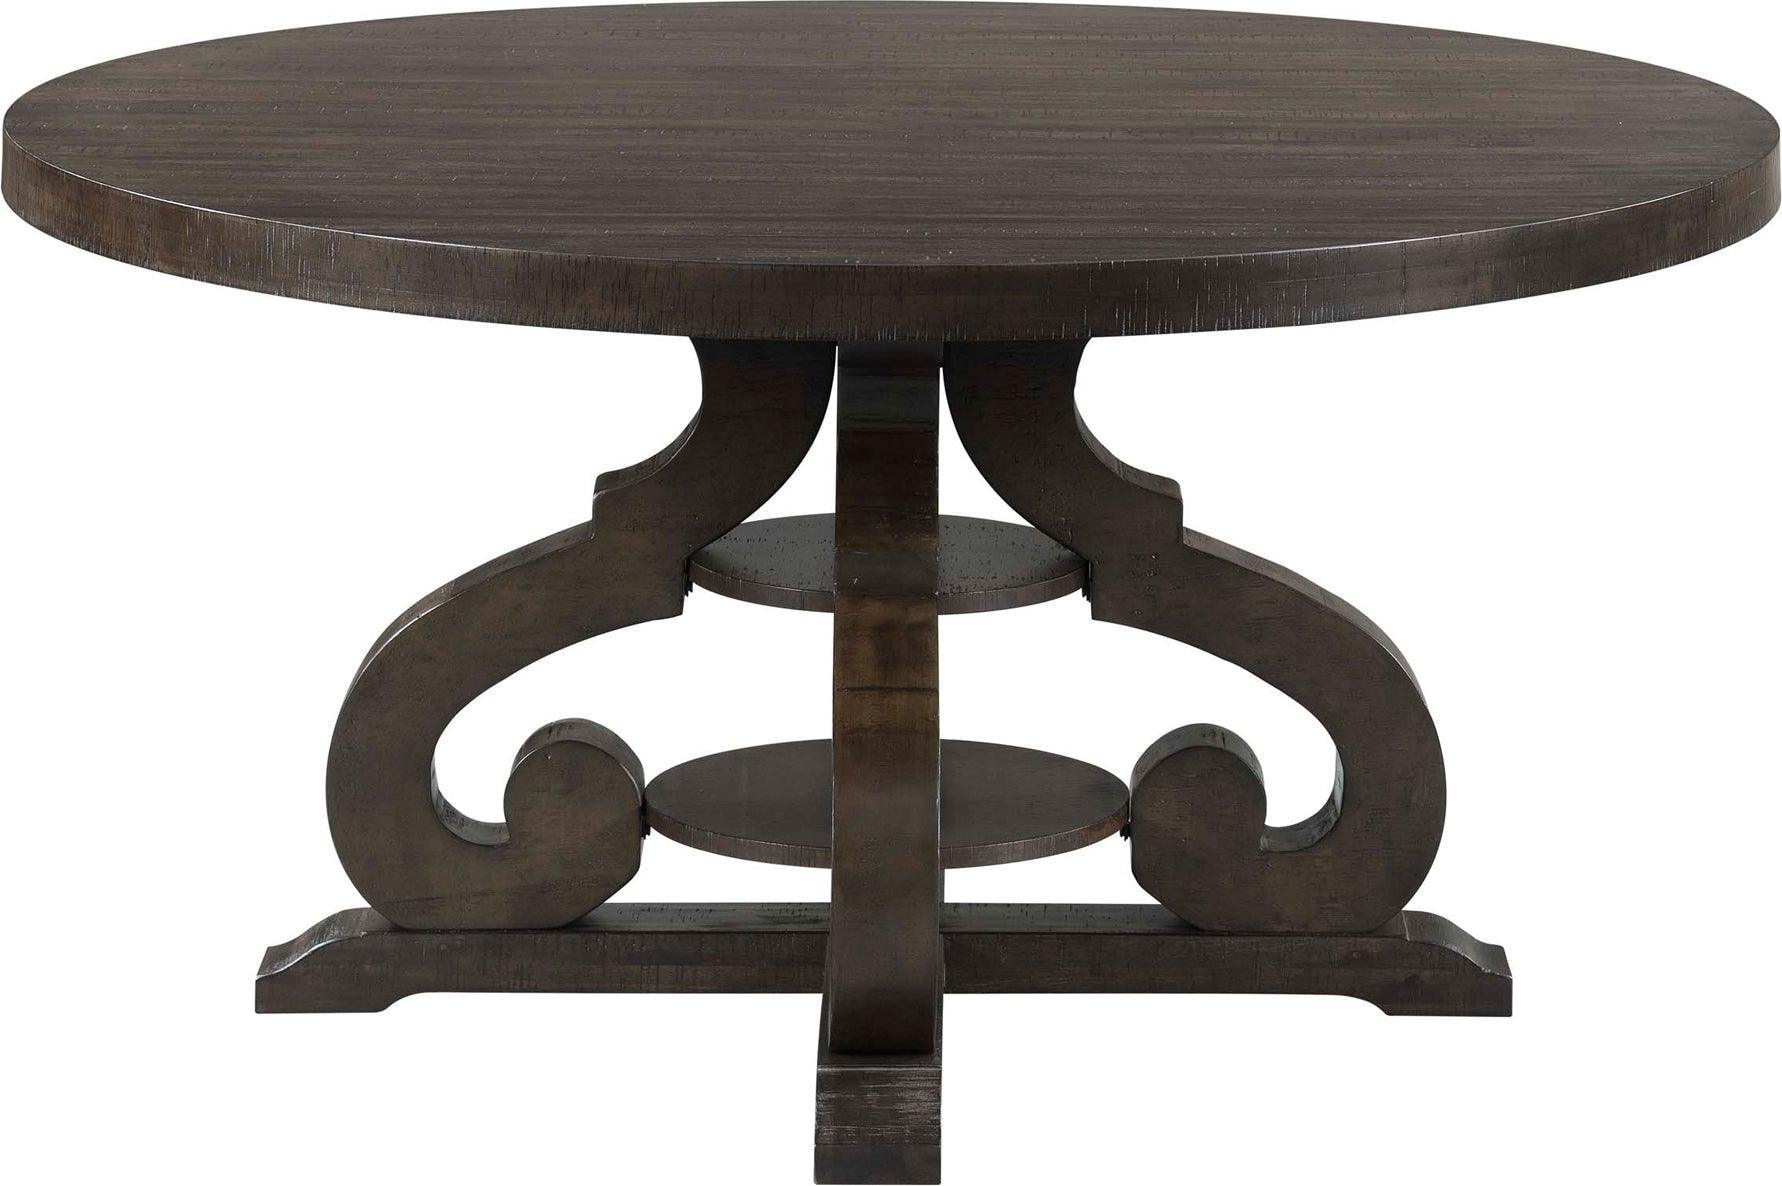 Elements Dining Tables - Stanford Round Dining Table Smokey Walnut